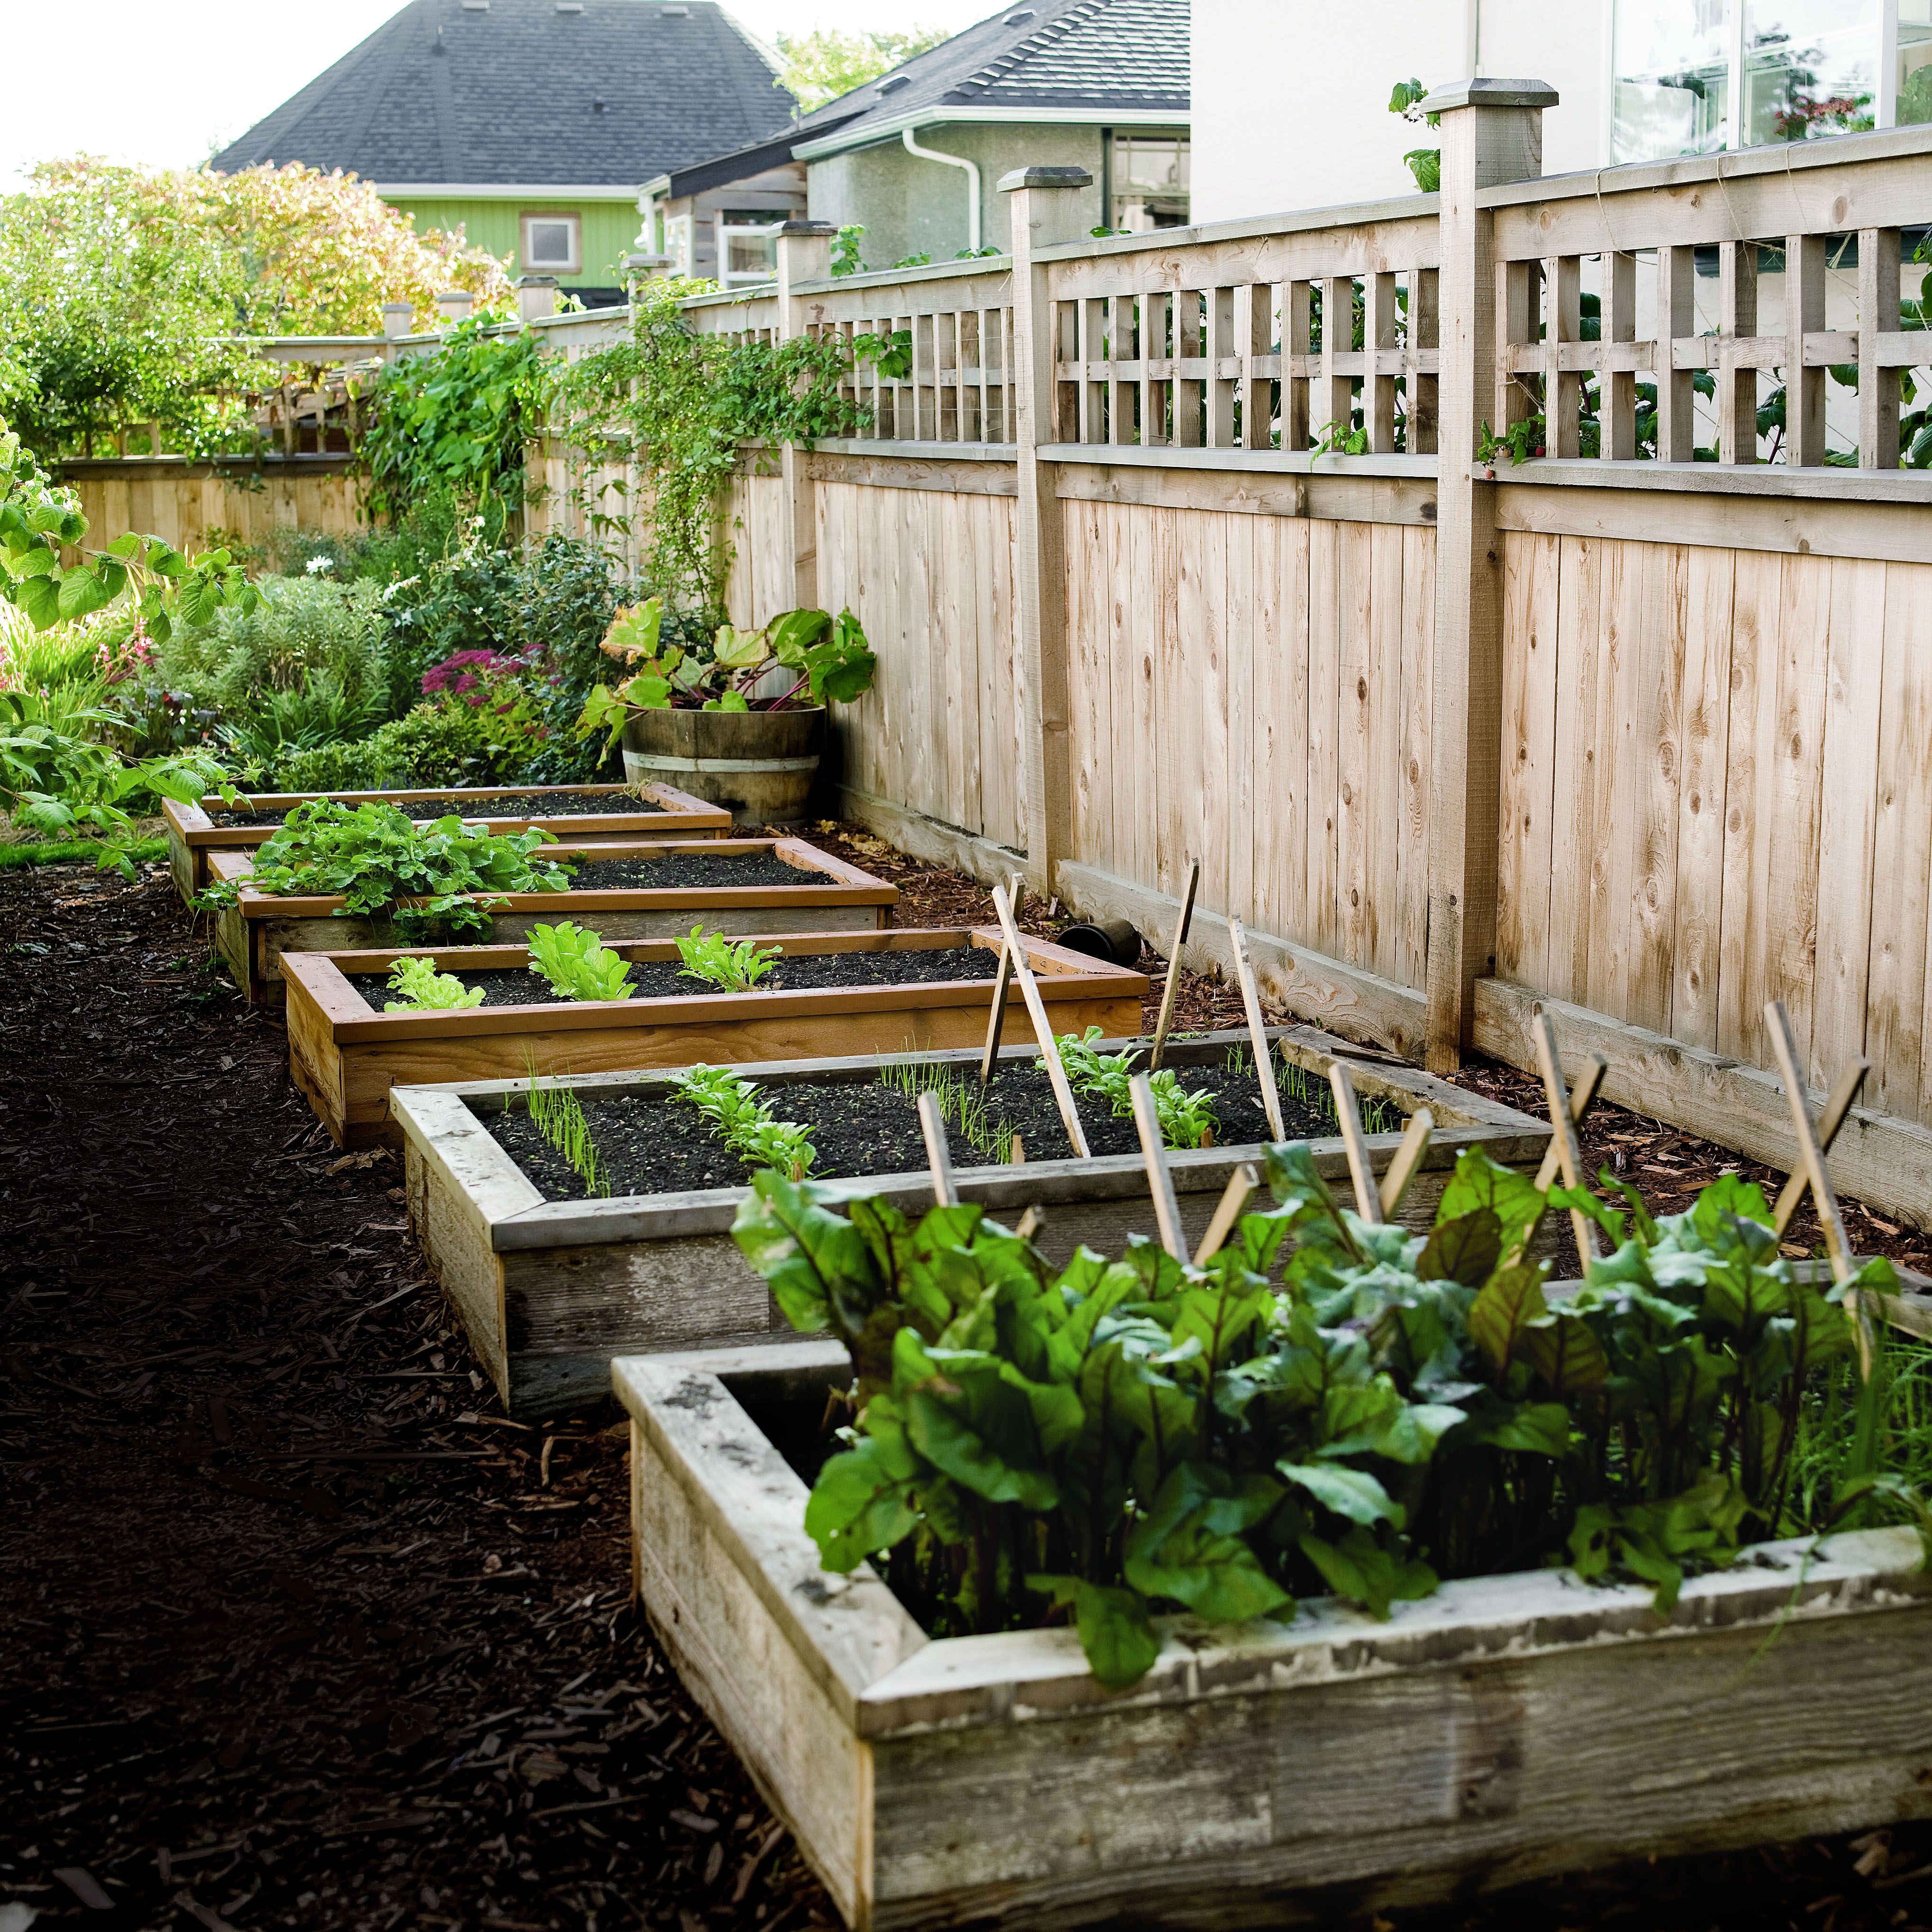 How to Make a New Raised Bed Garden Step-by-Step